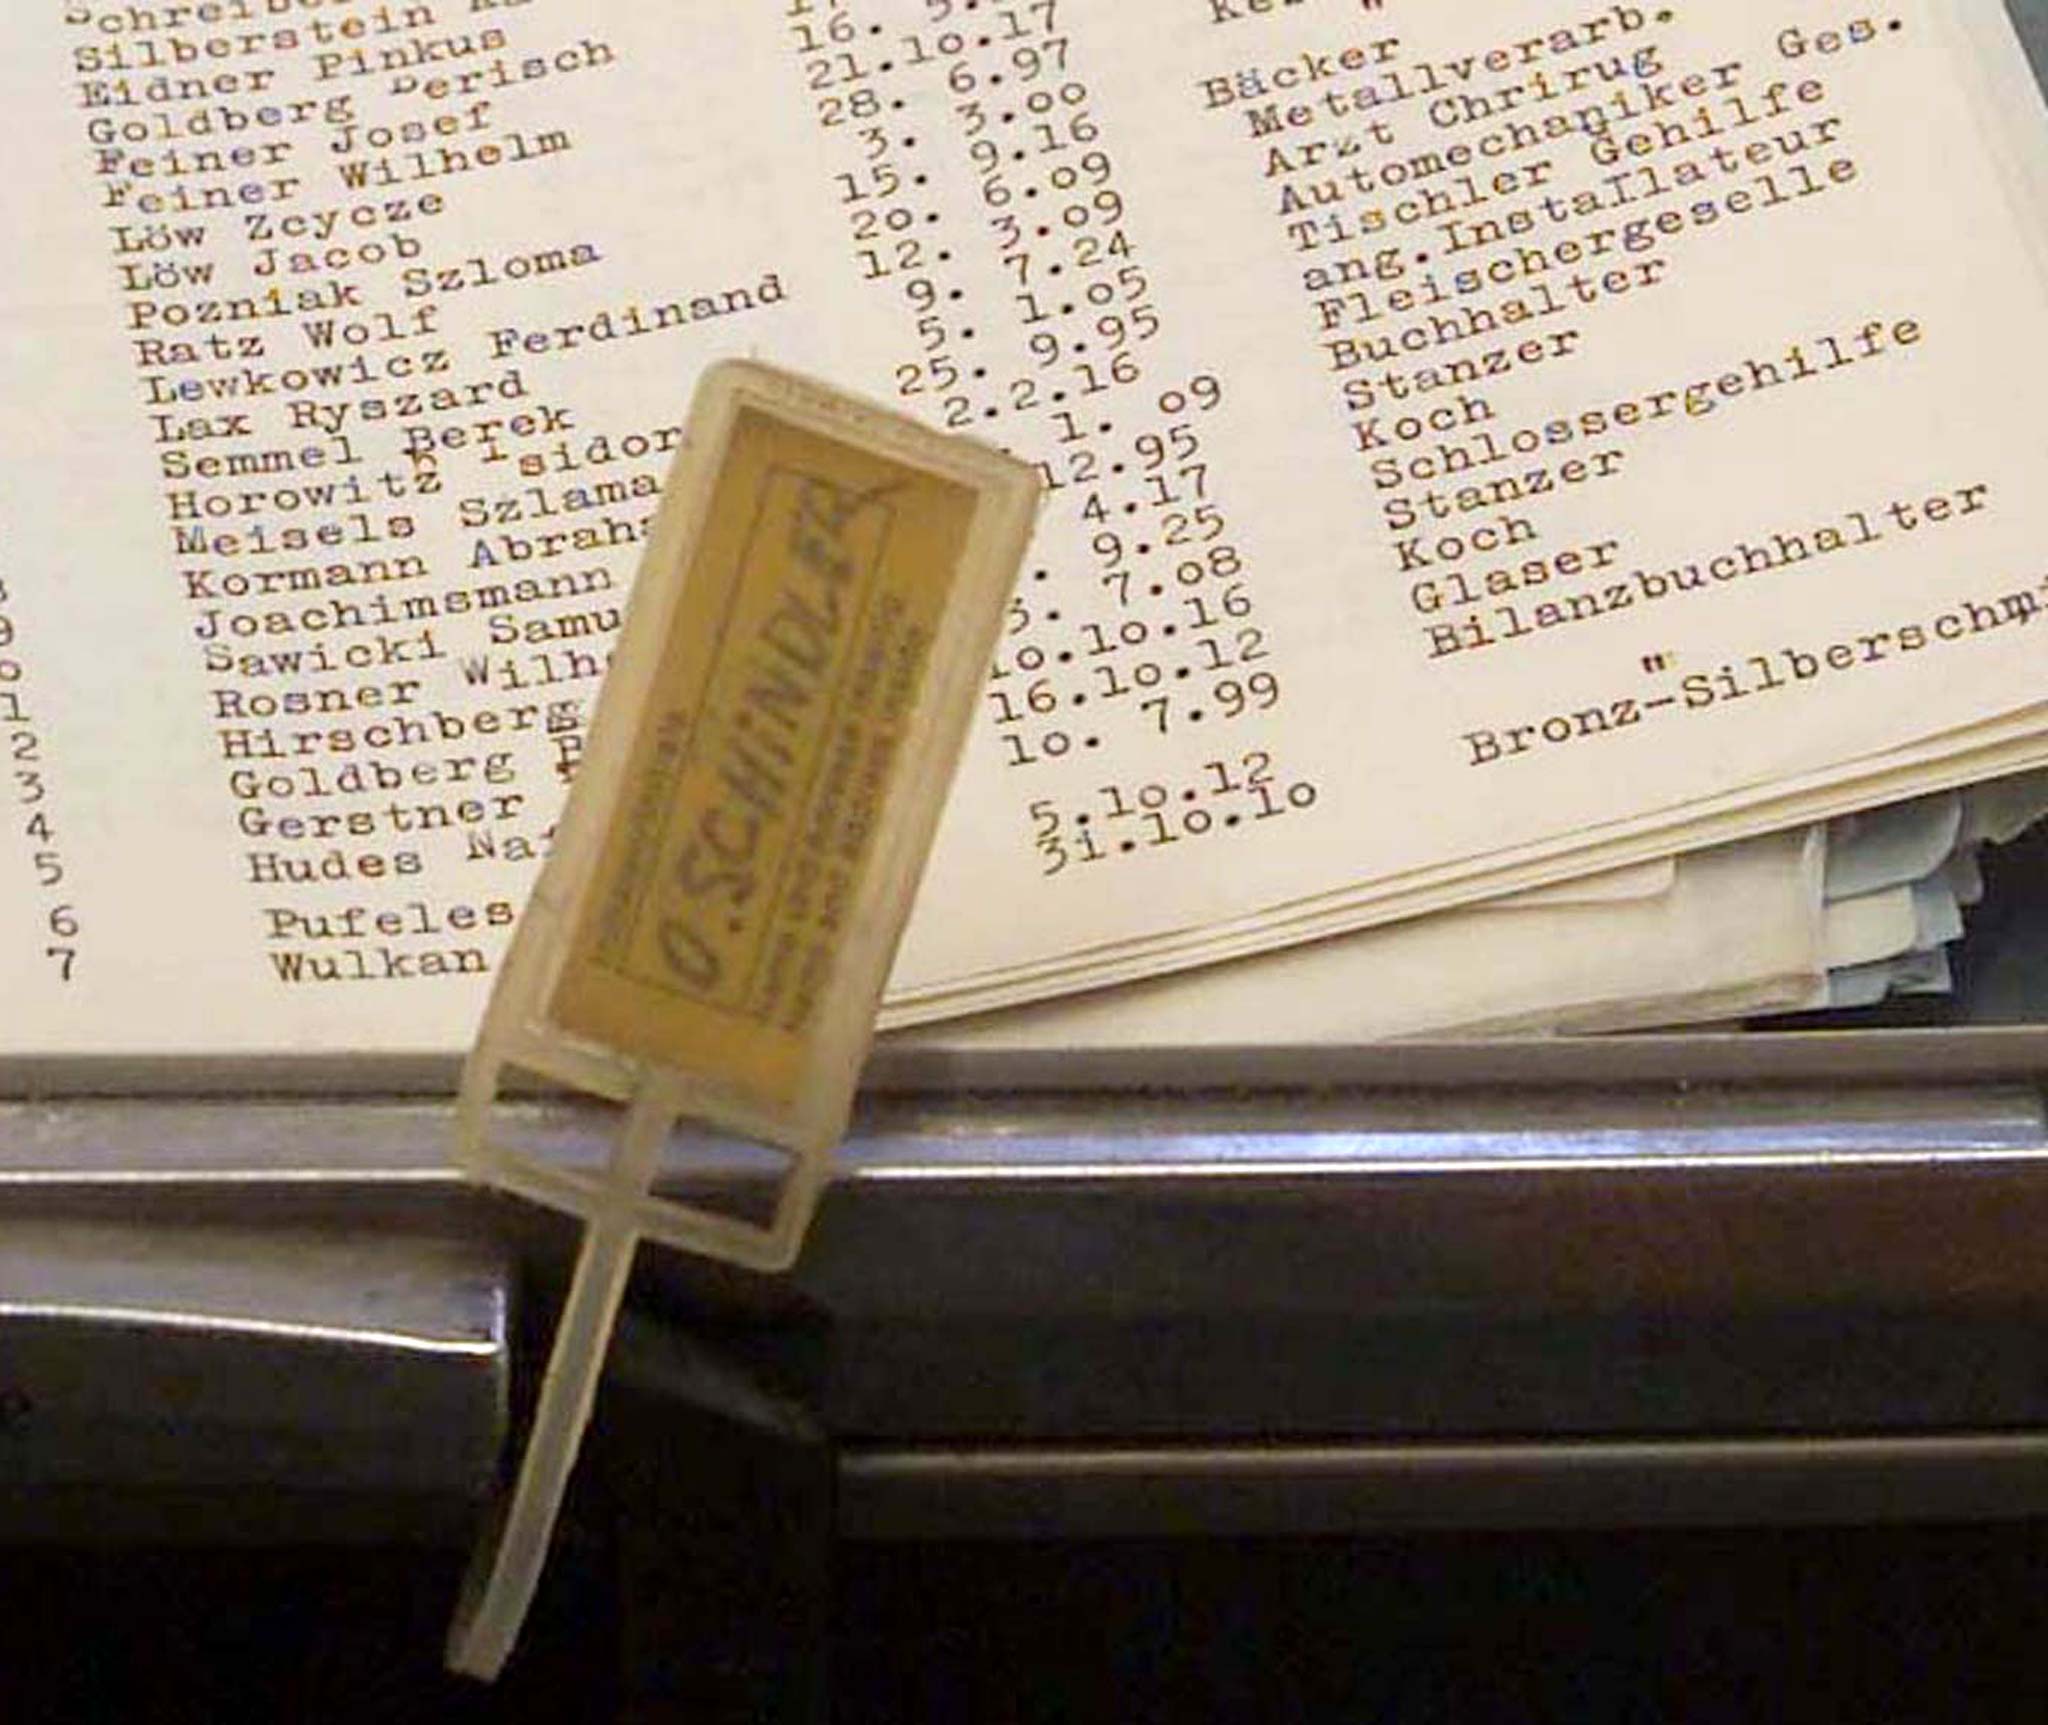 Picture shows the name tag "O. Schindler" on a suitcase with the original copy of a list of over 1,2..